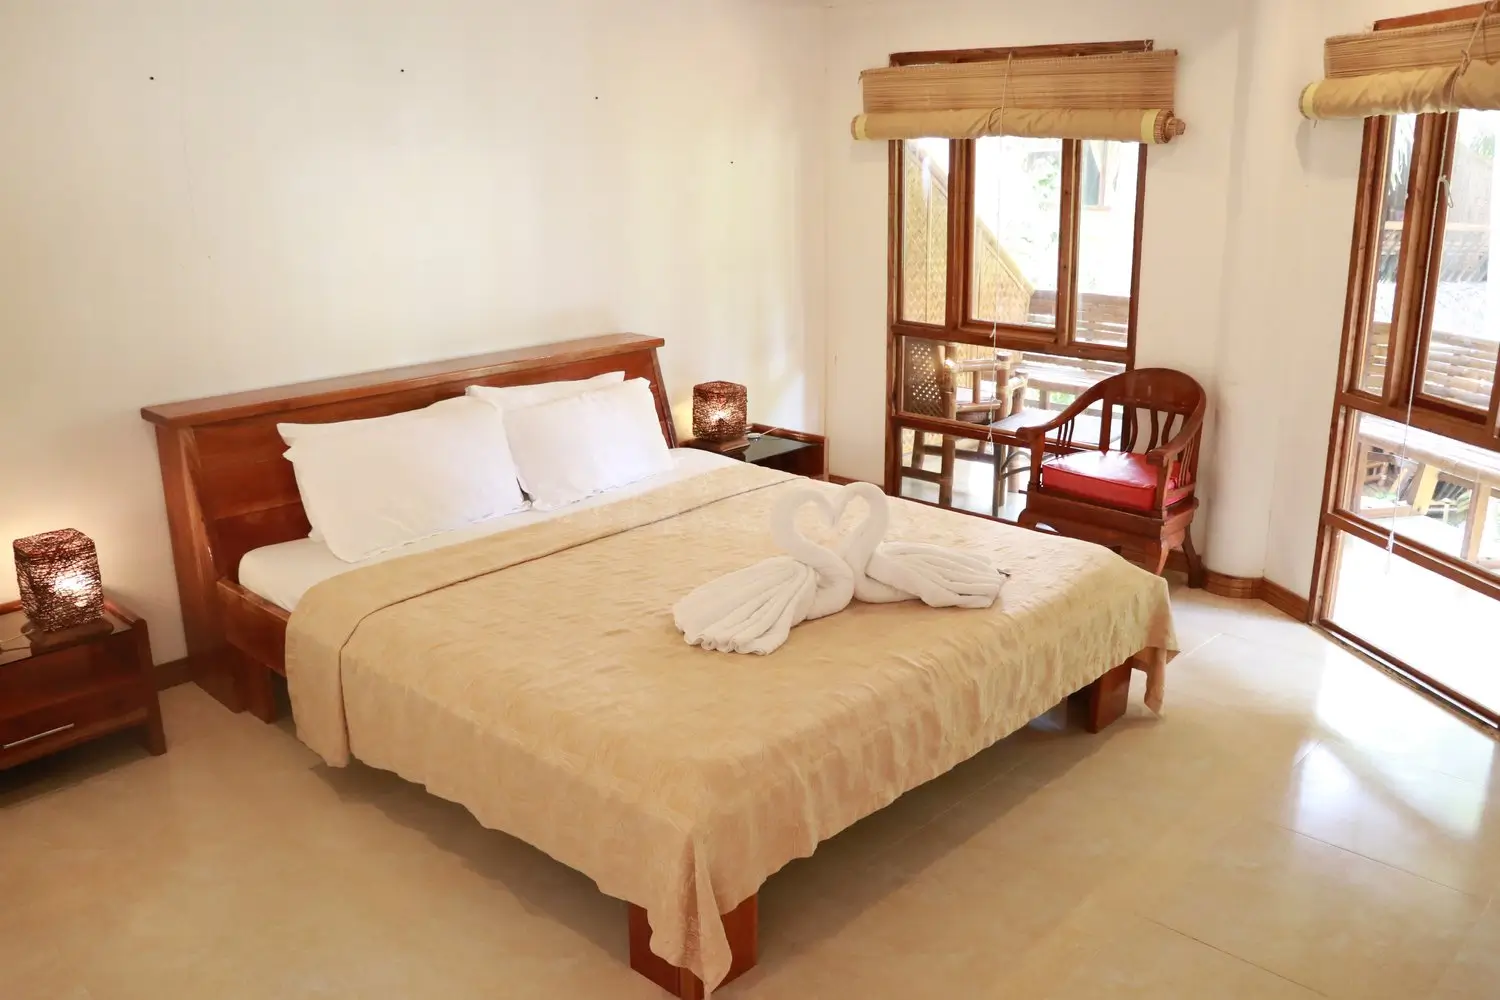 Bright and airy bedroom at Nigi Nigi Nu Noos Boutique Hotel in Boracay, featuring a queen-sized bed with white linens, wooden furniture, and towel art of two swans on the bed.